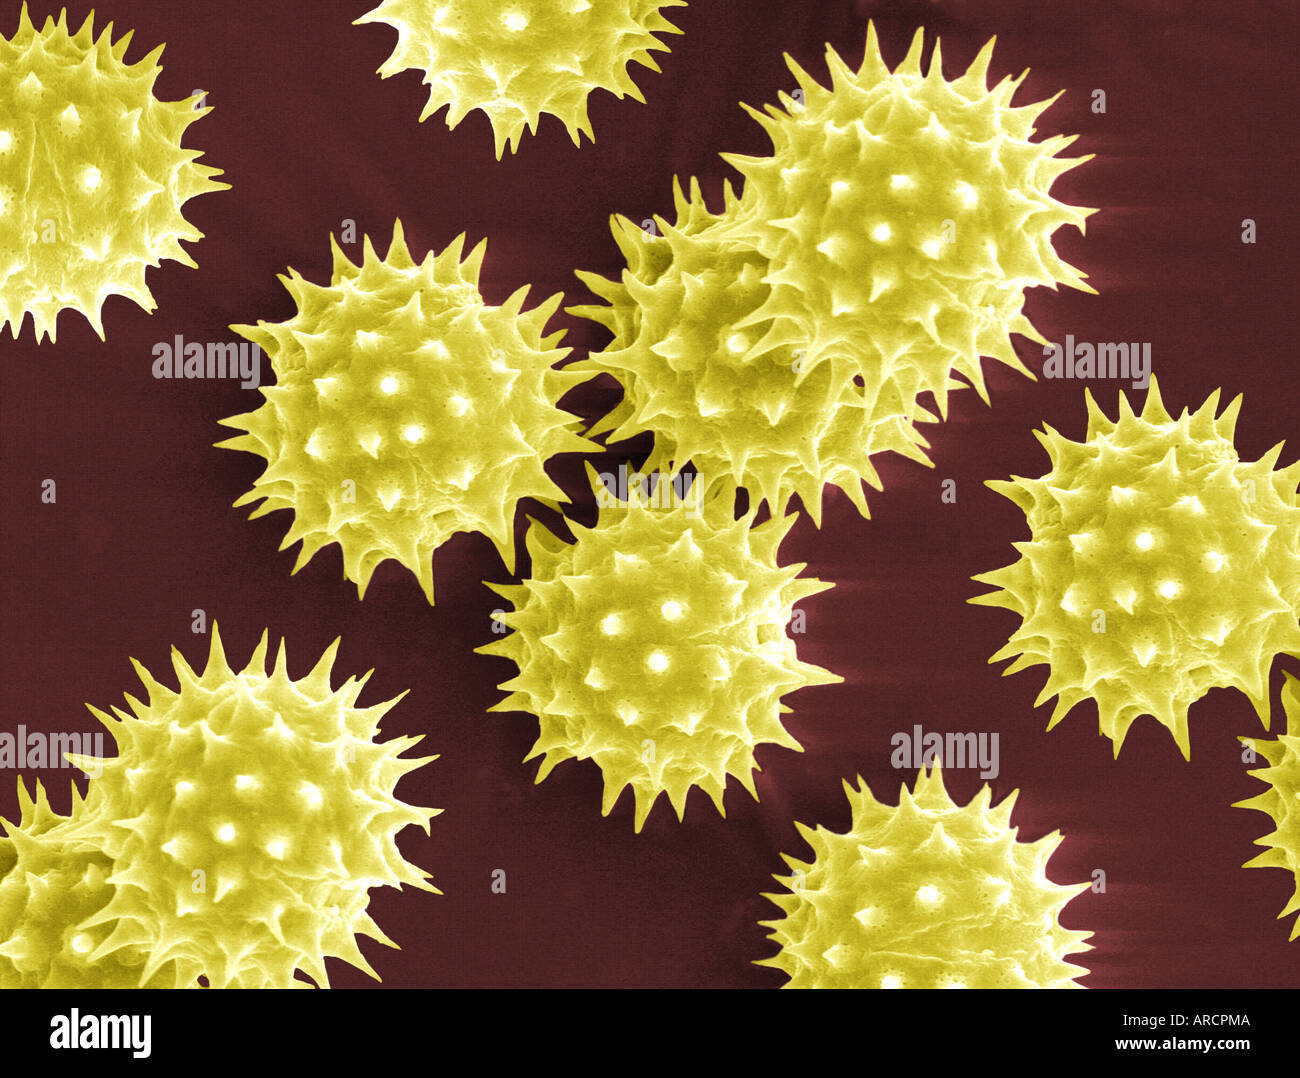 Scanning electron microscope image of pollen grains from Helianthus annuus (common sunflower). Stock Photo